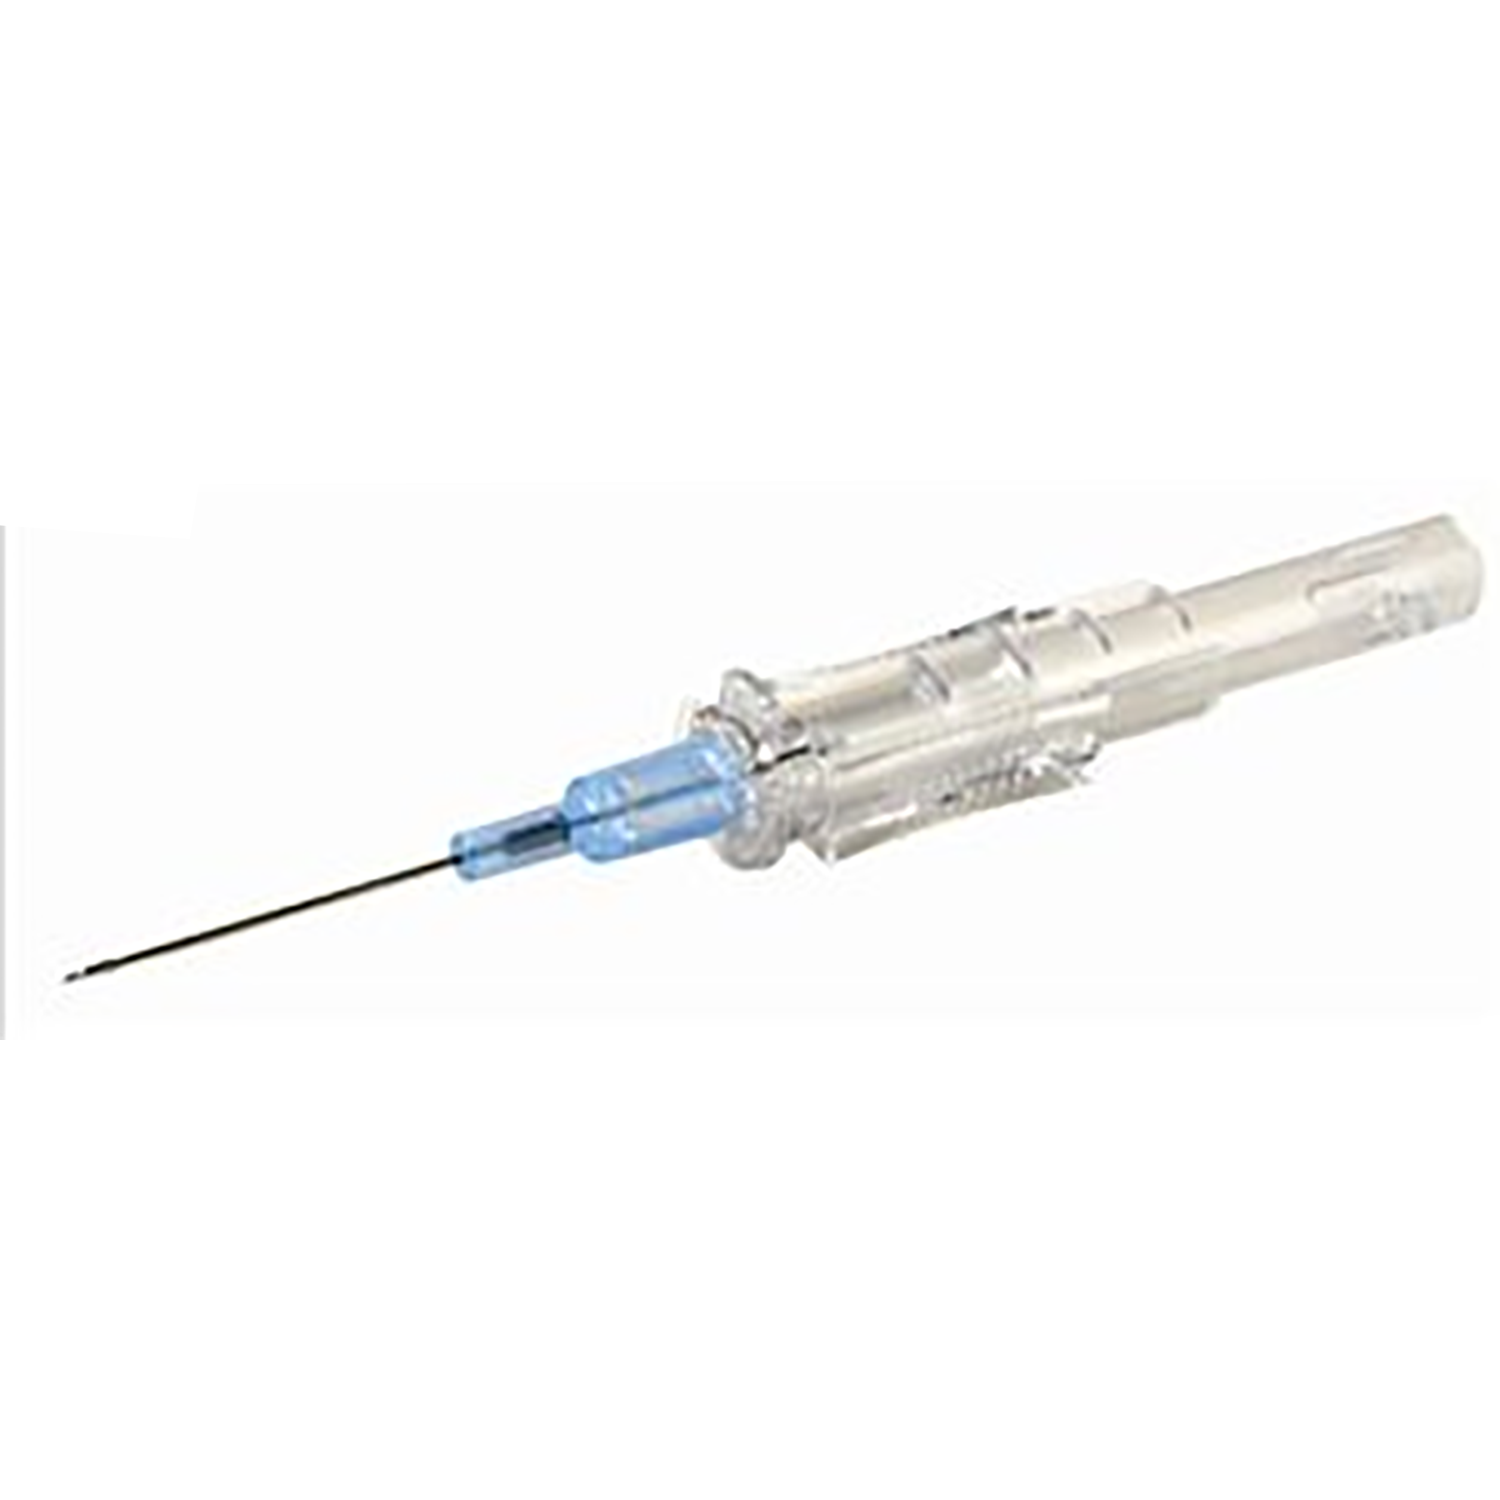 Safety Peripheral Intravenous Cannula | Non-winged Blue 22G x 32mm | Techrilon PUR Radiopaque | Pack of 200